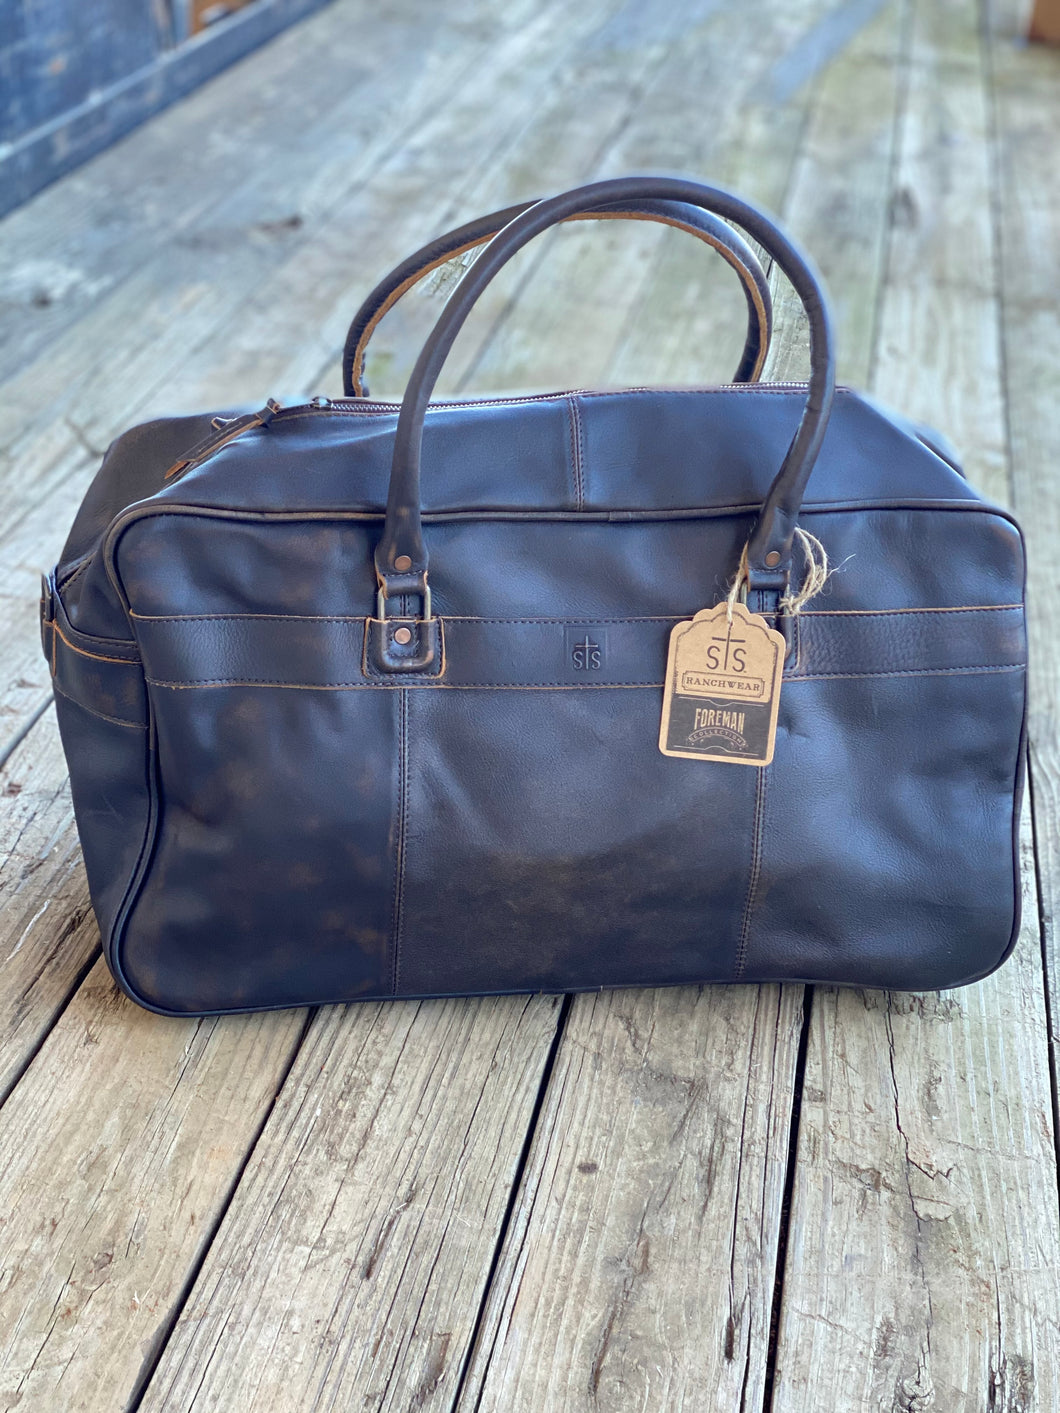 STS Pony Express Duffle